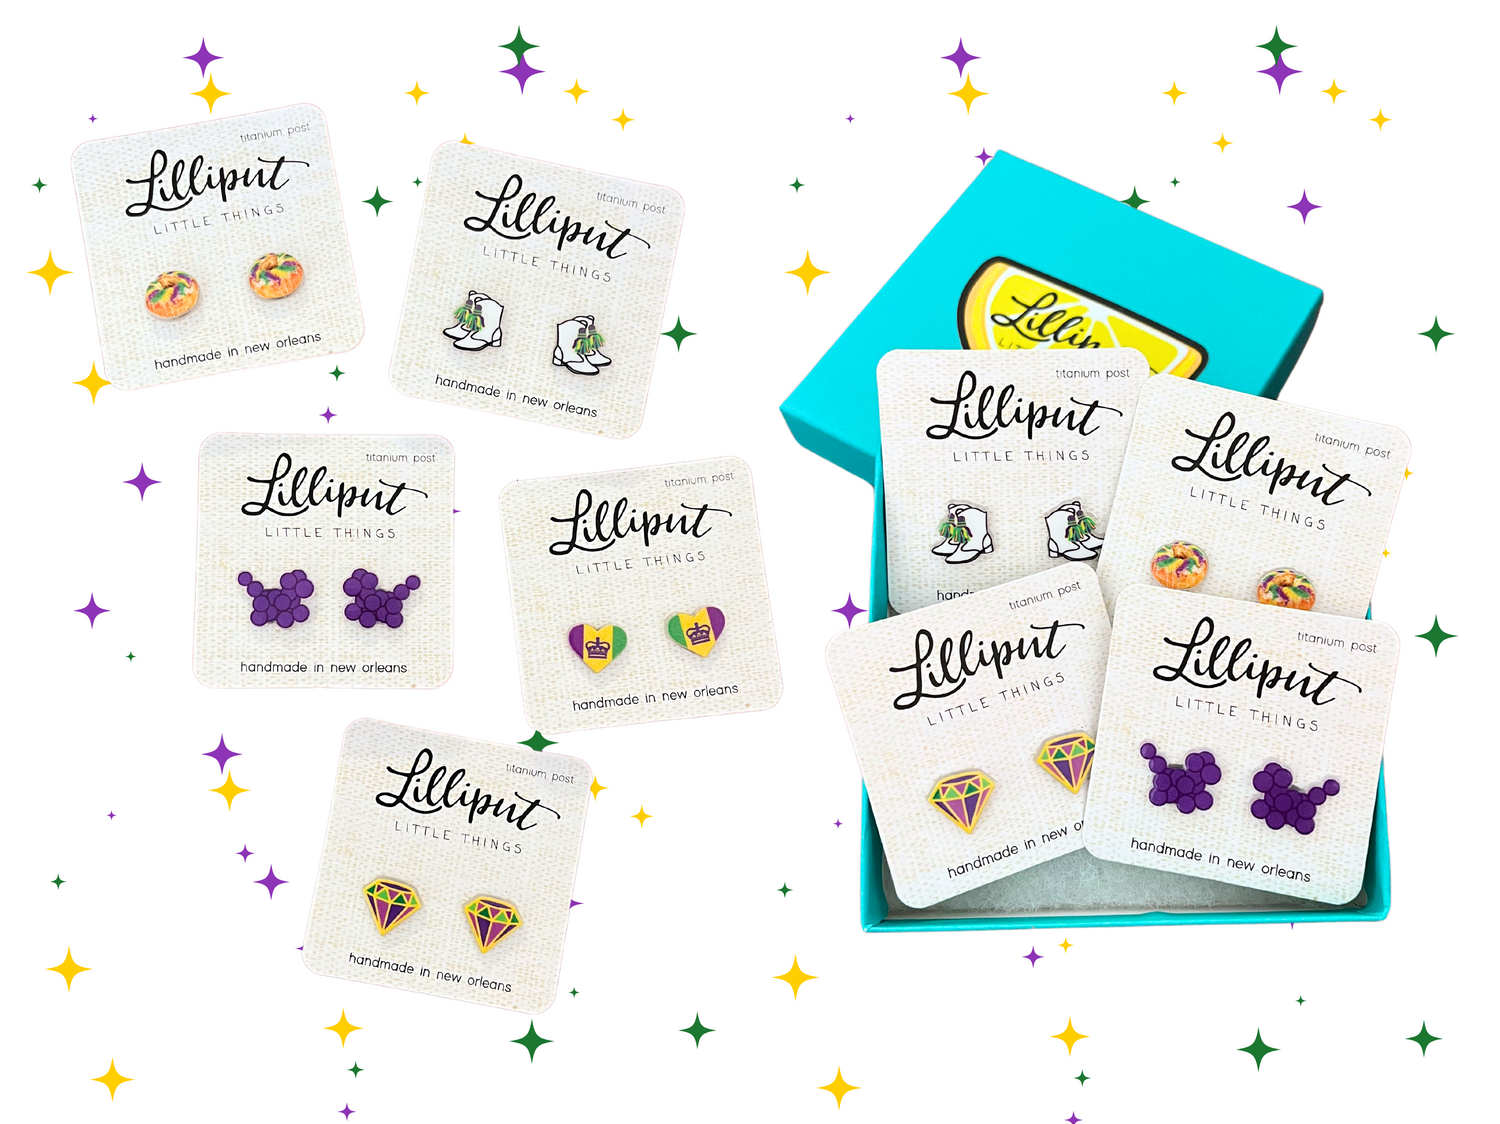 lil pickle earrings — These Things Shop // cute plushies and accessories  for you